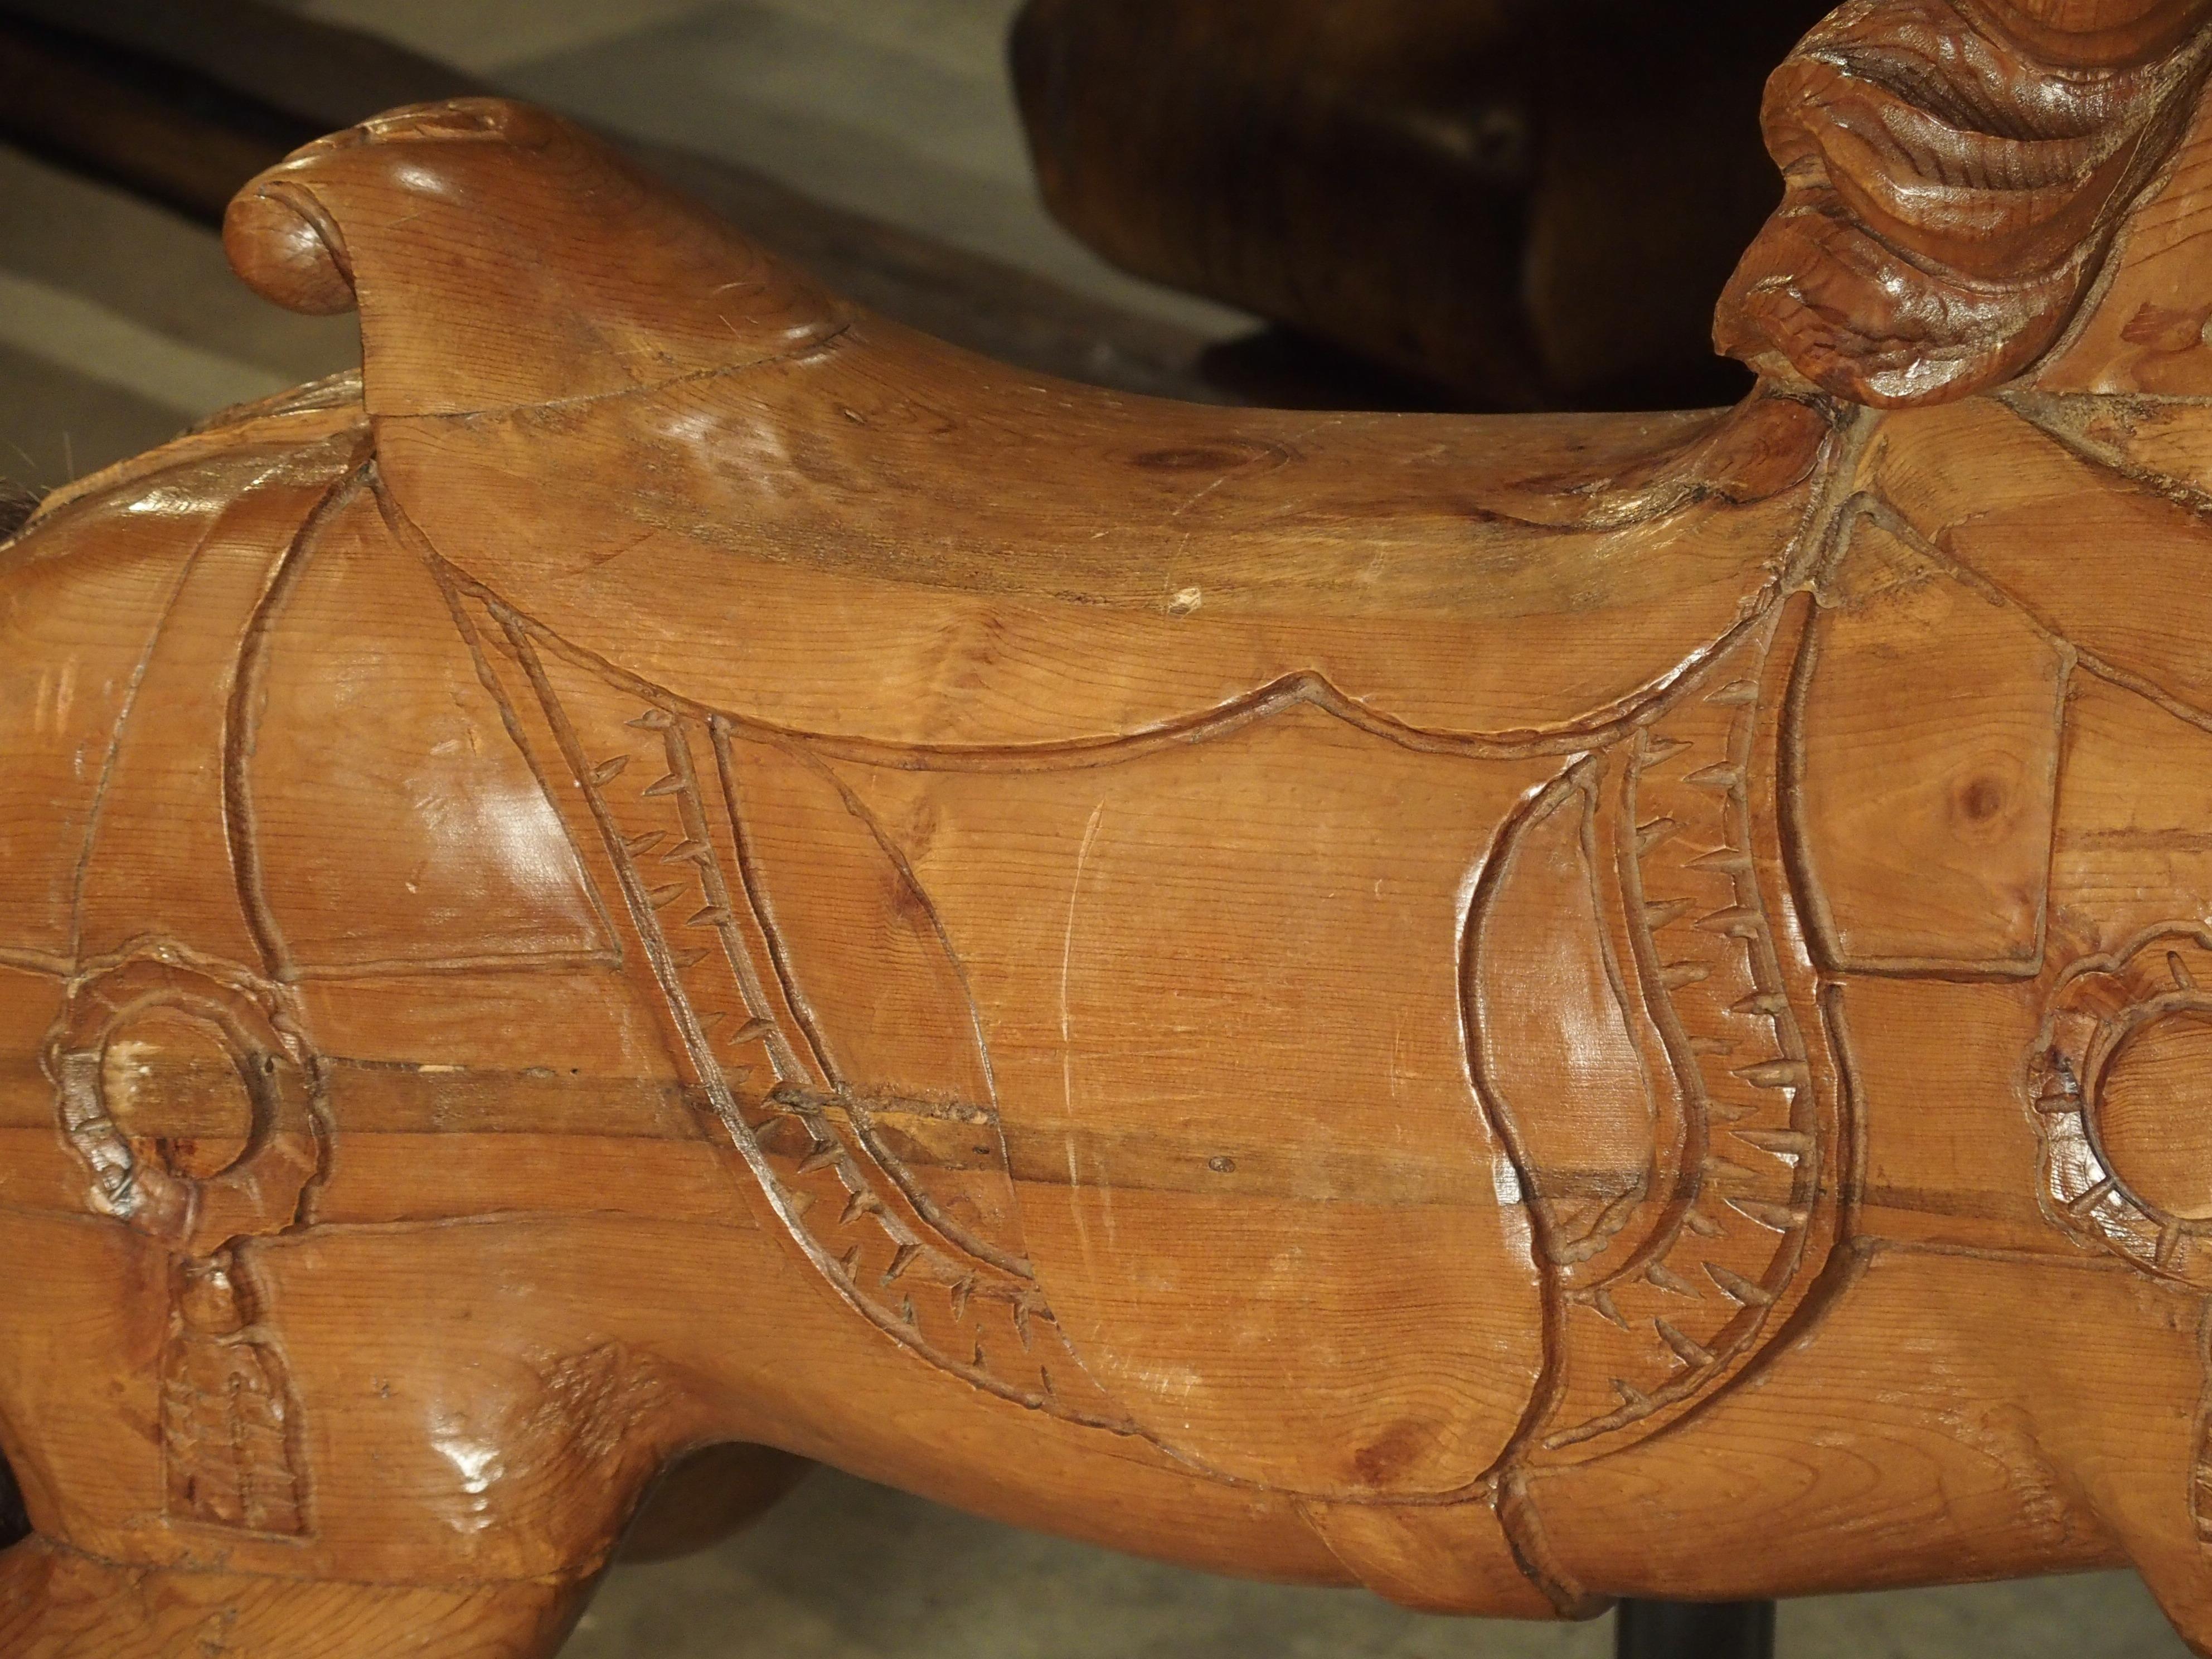 Hand-Carved Wooden Jumping Horse on Stand from Barcelona Spain, circa 1900